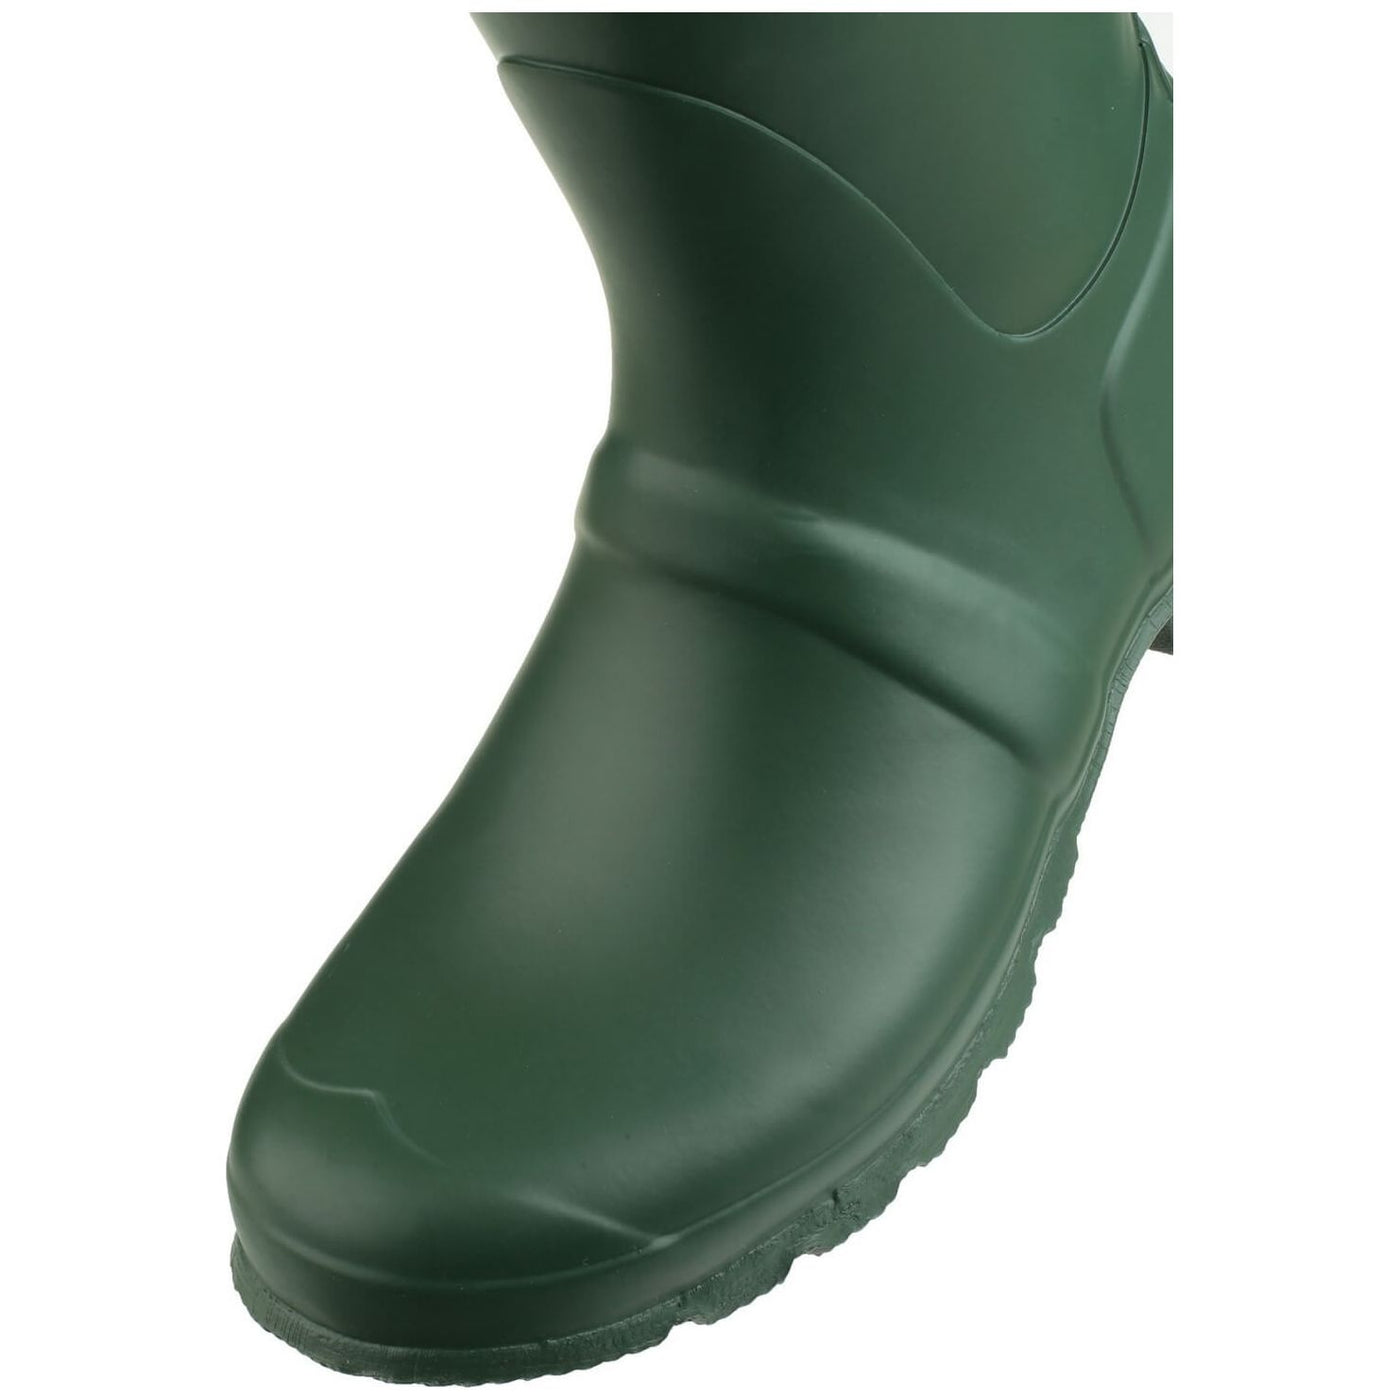 Cotswold Windsor High Wellies-Green -6